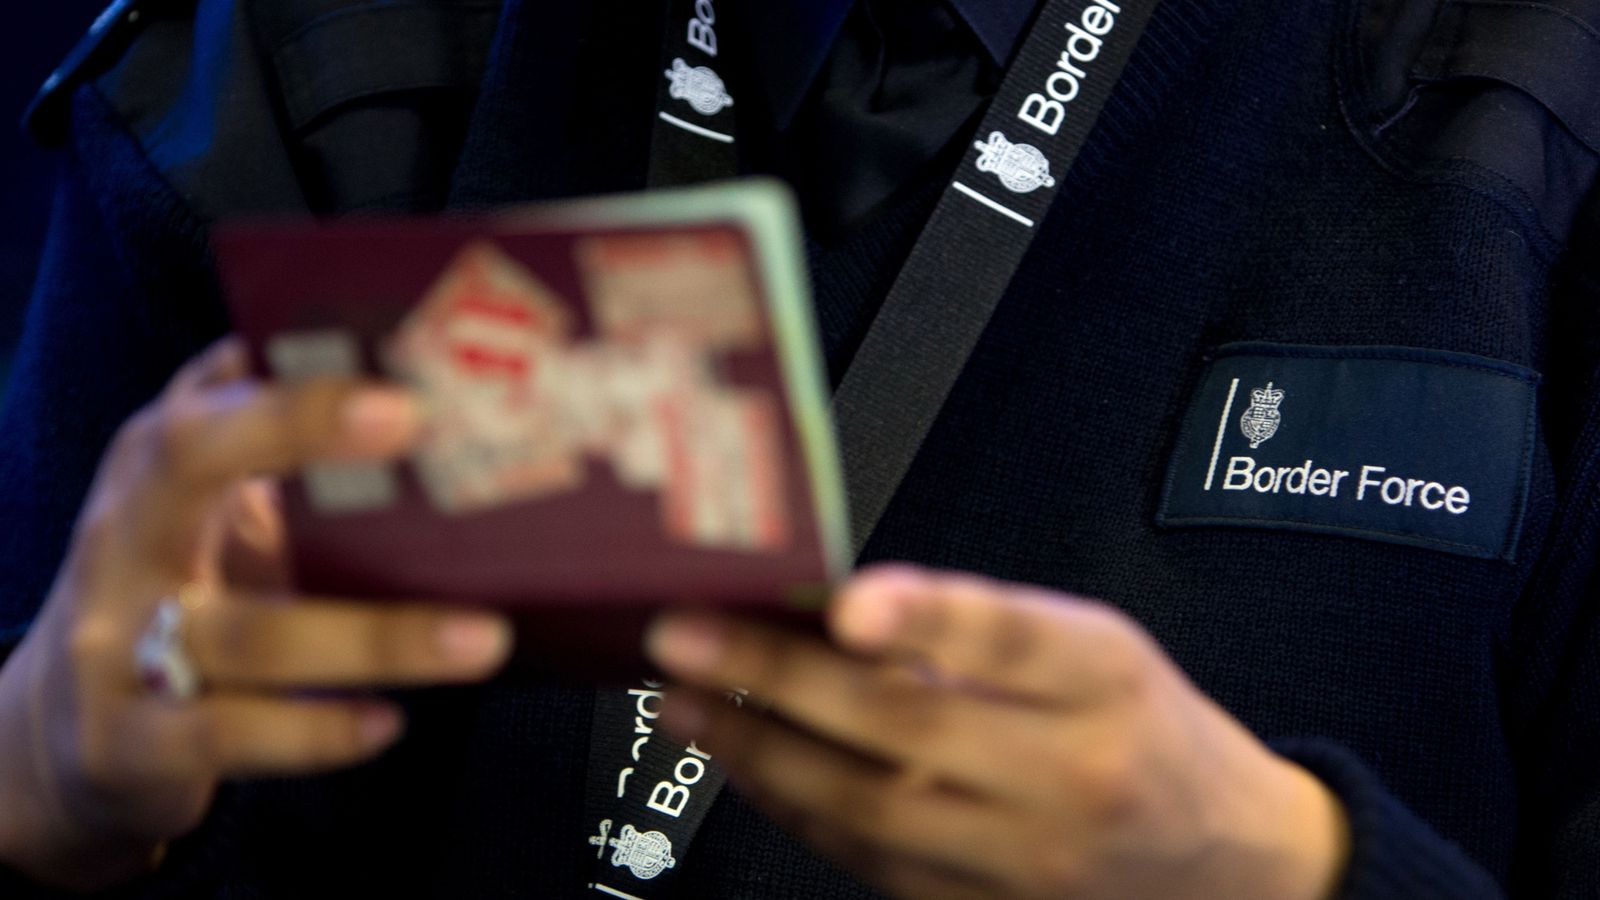 More bad news for the govt as 'embarrassed' backbenchers demand action on net migration